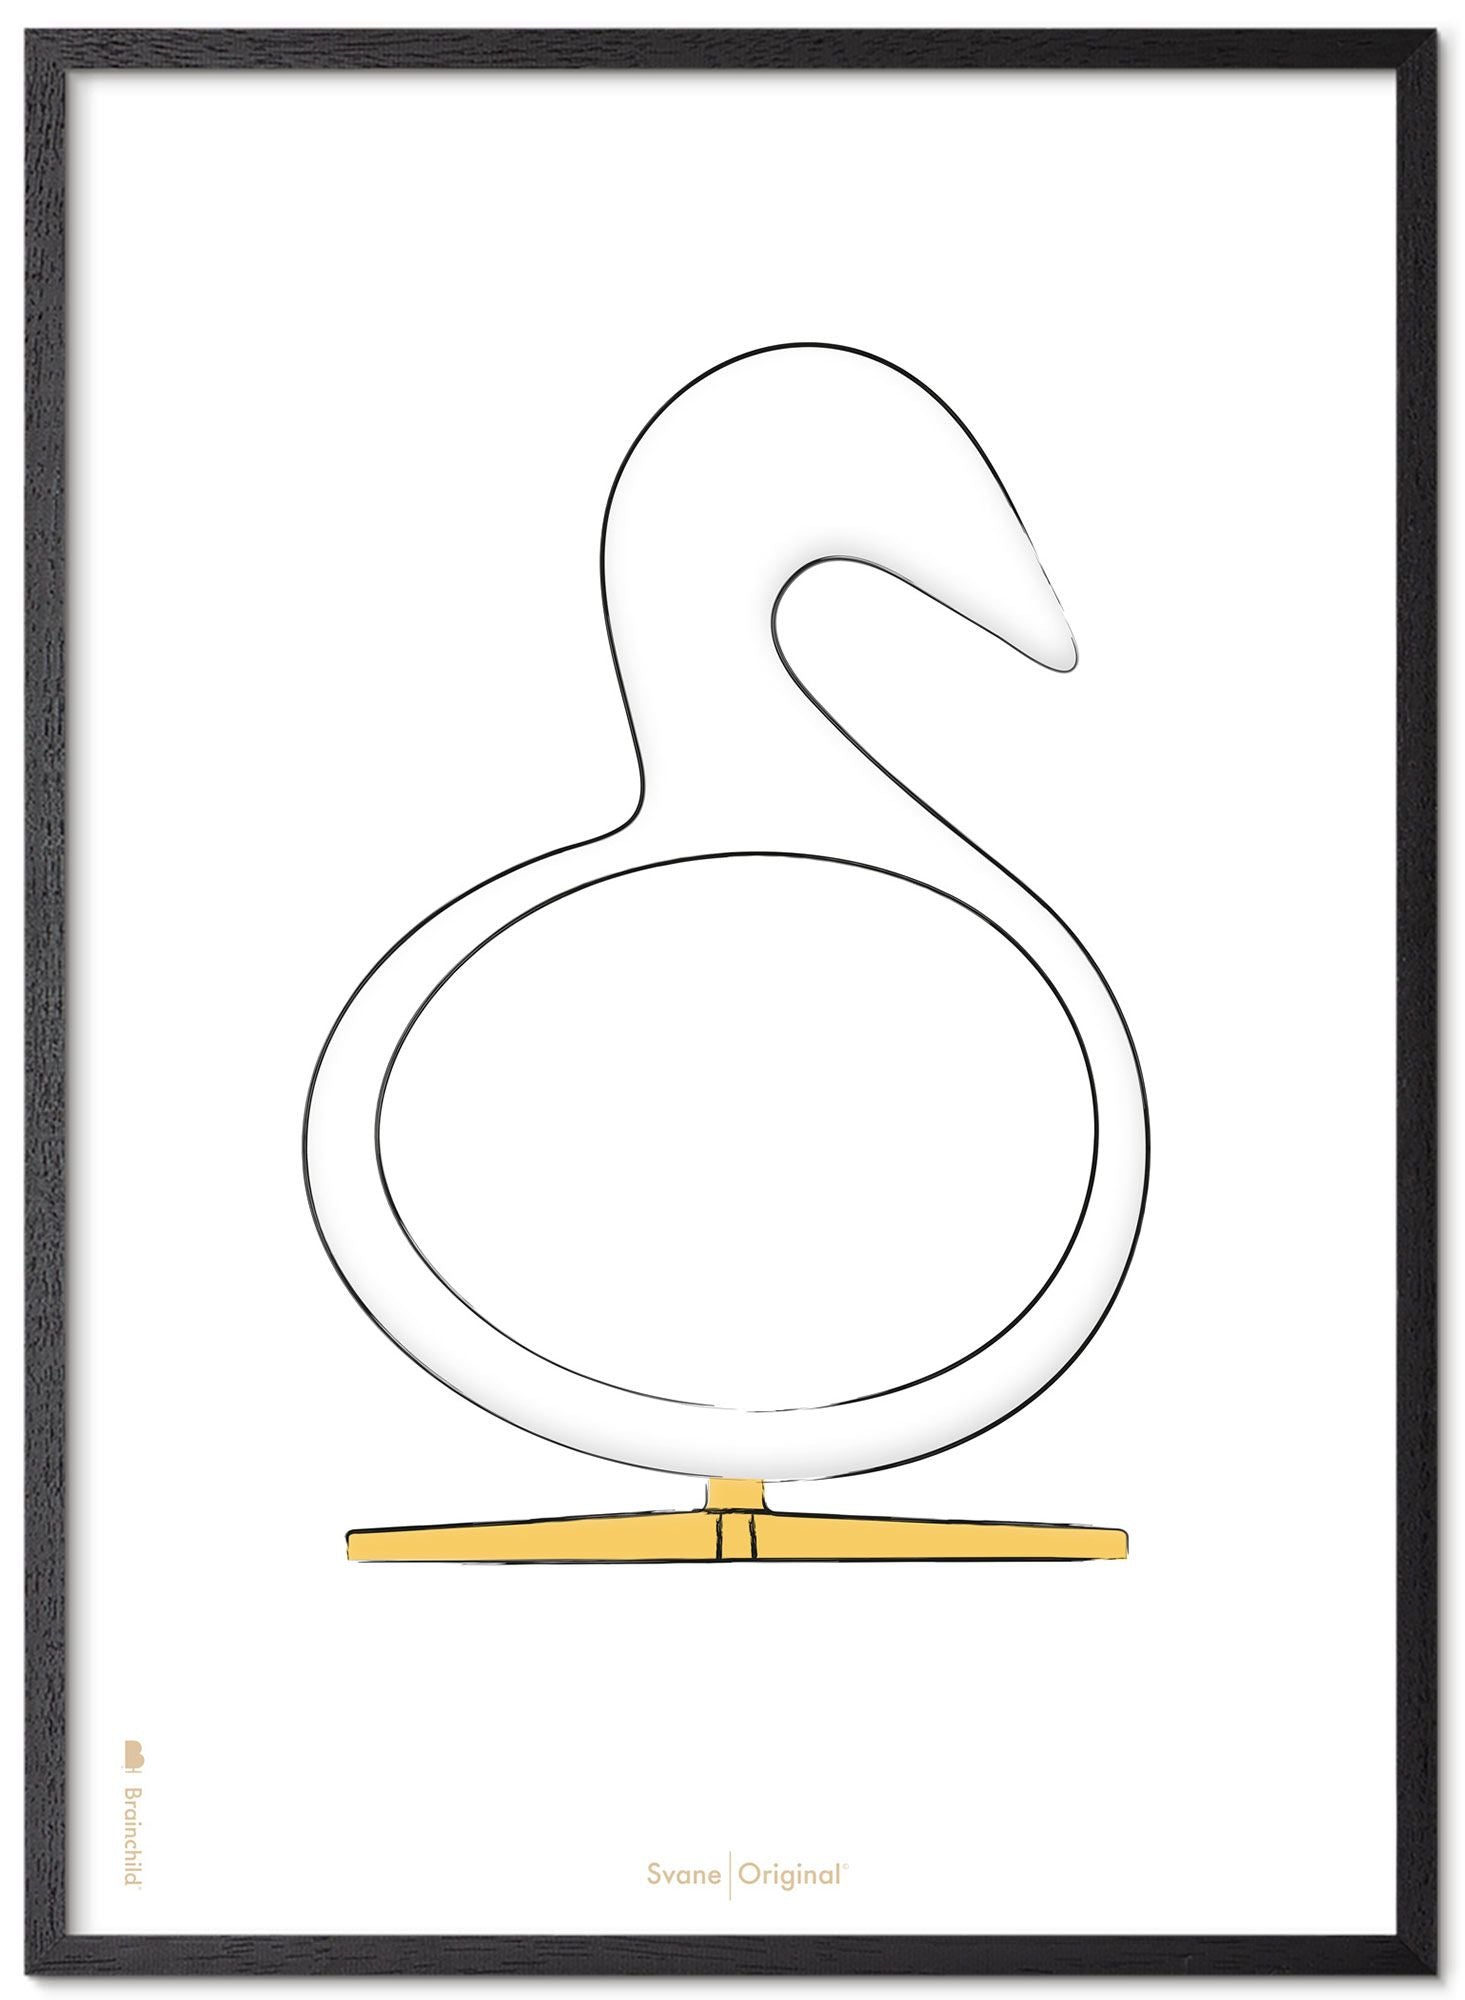 Brainchild Swan Design Sketch Poster Frame Made Of Black Lacquered Wood 50x70 Cm, White Background